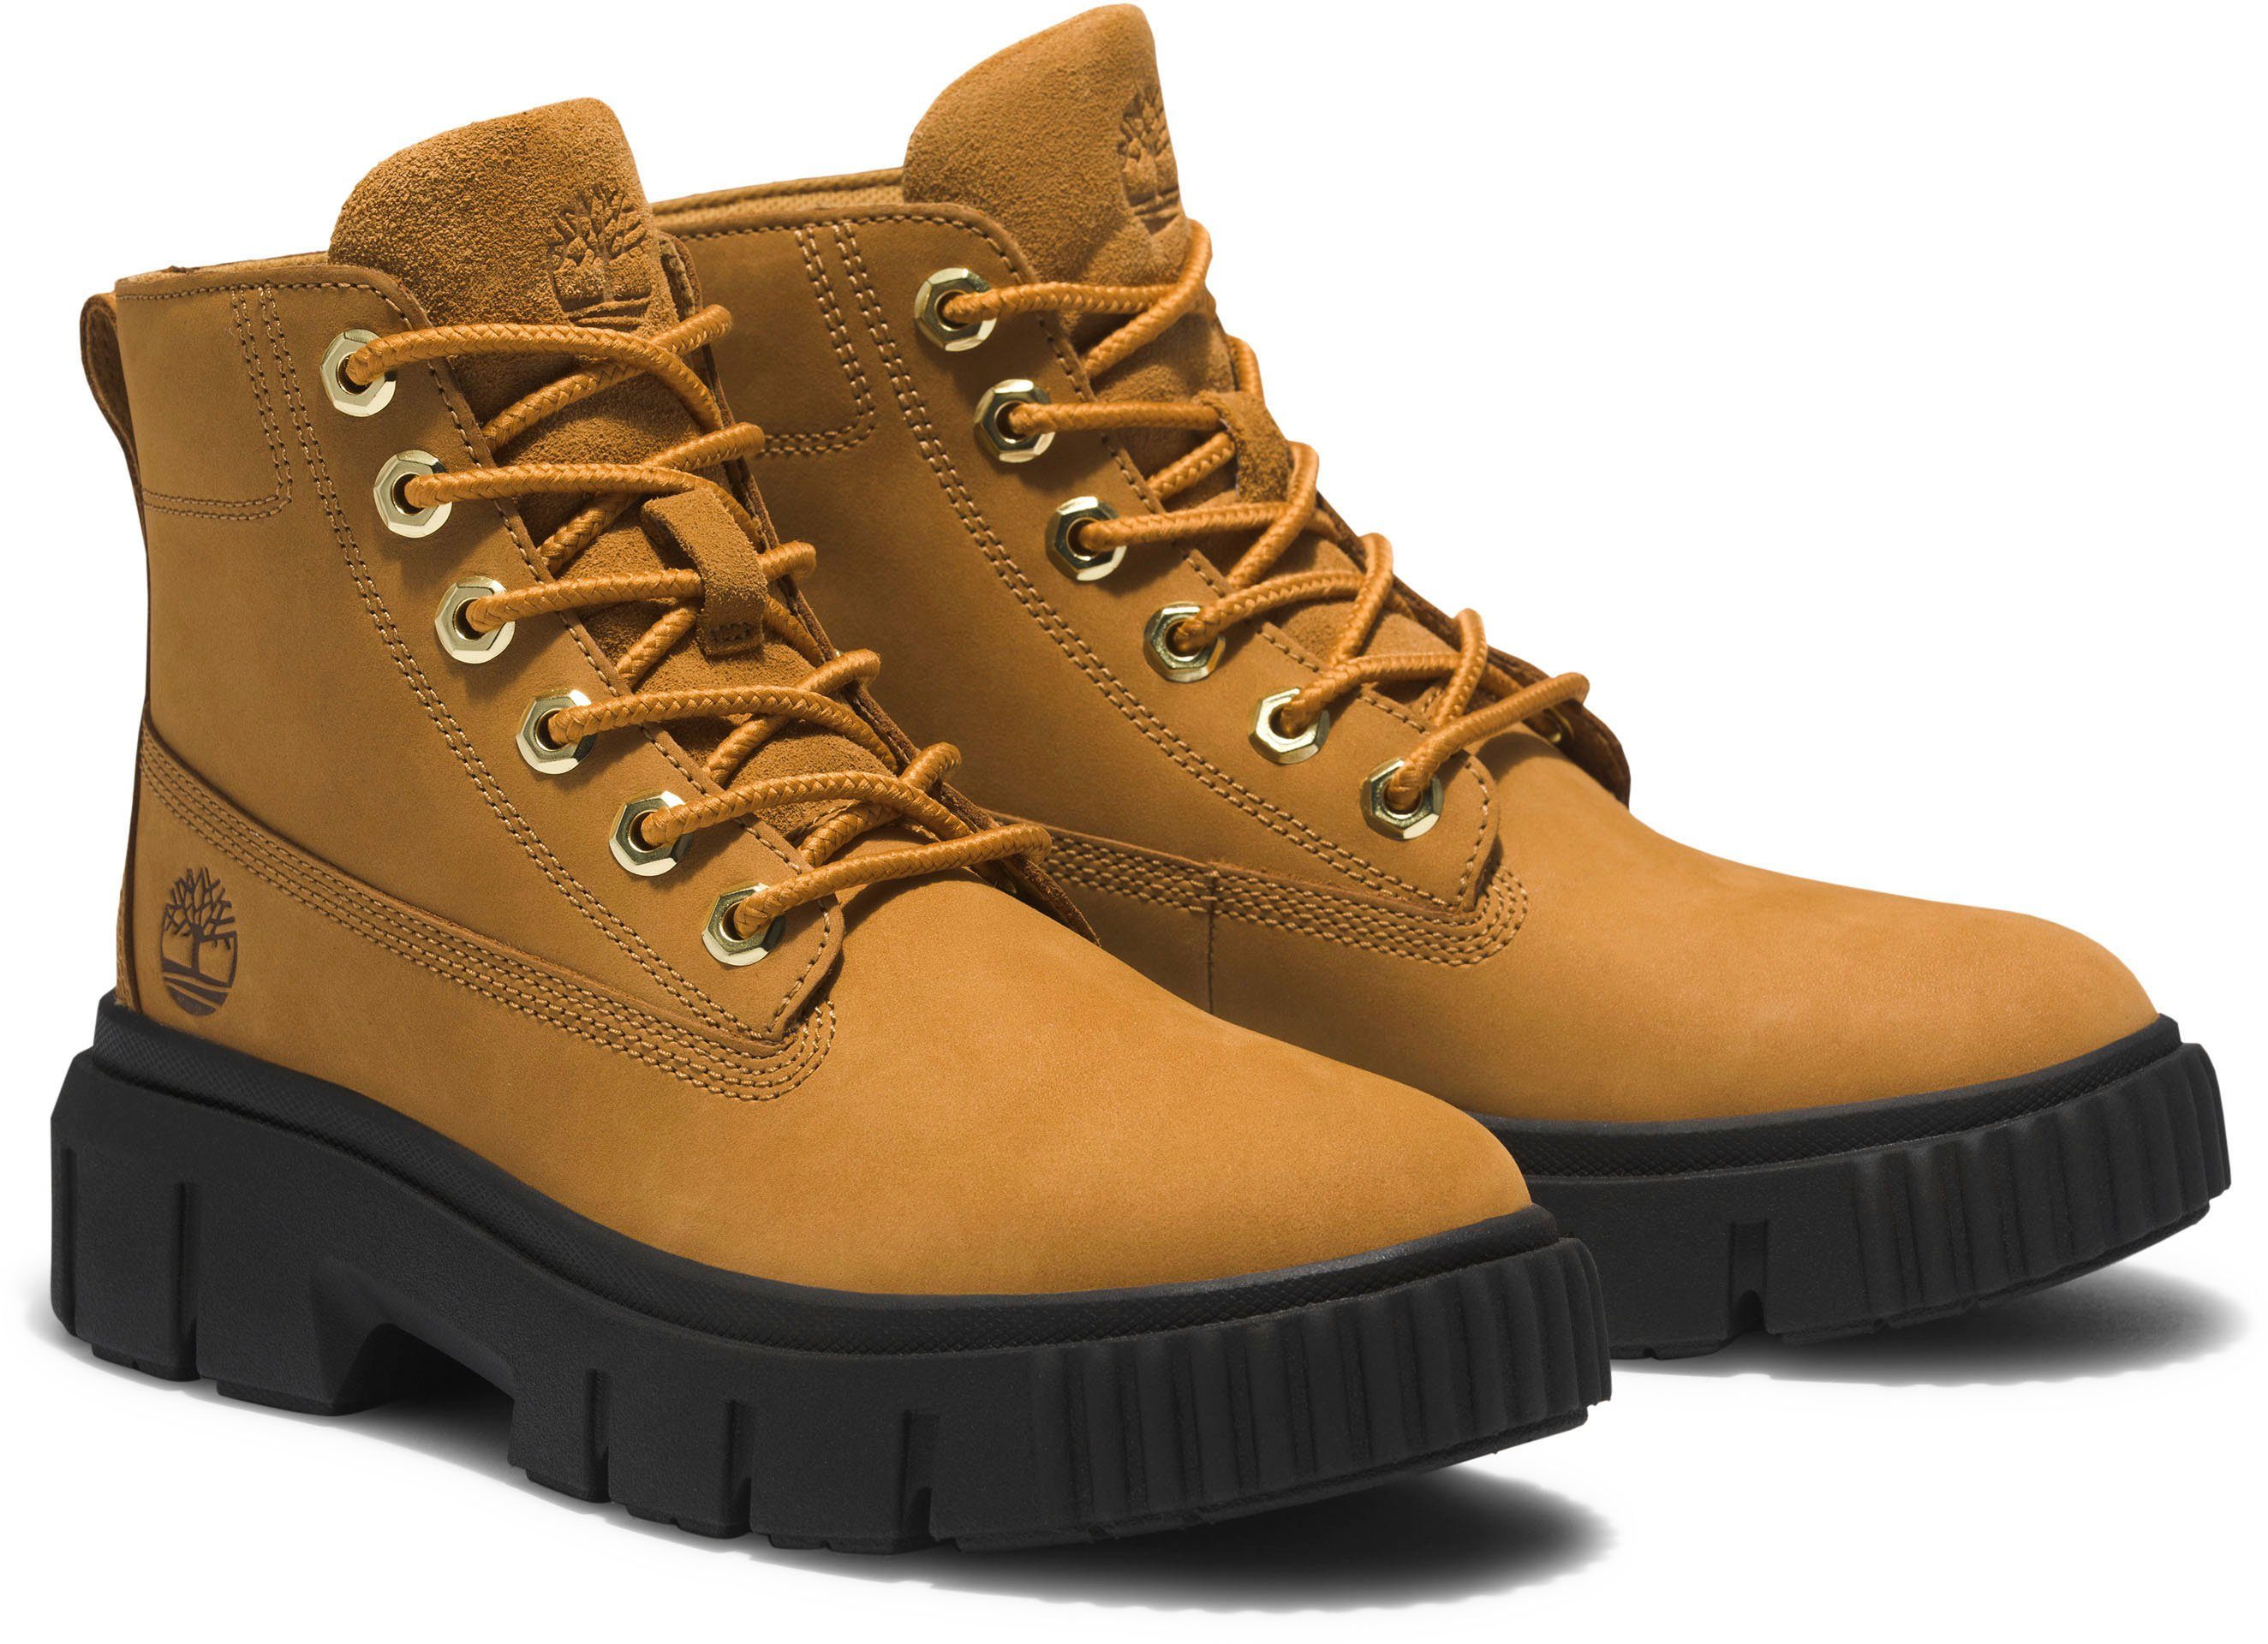 Timberland Greyfield Leather Schnürboots Boot wheat